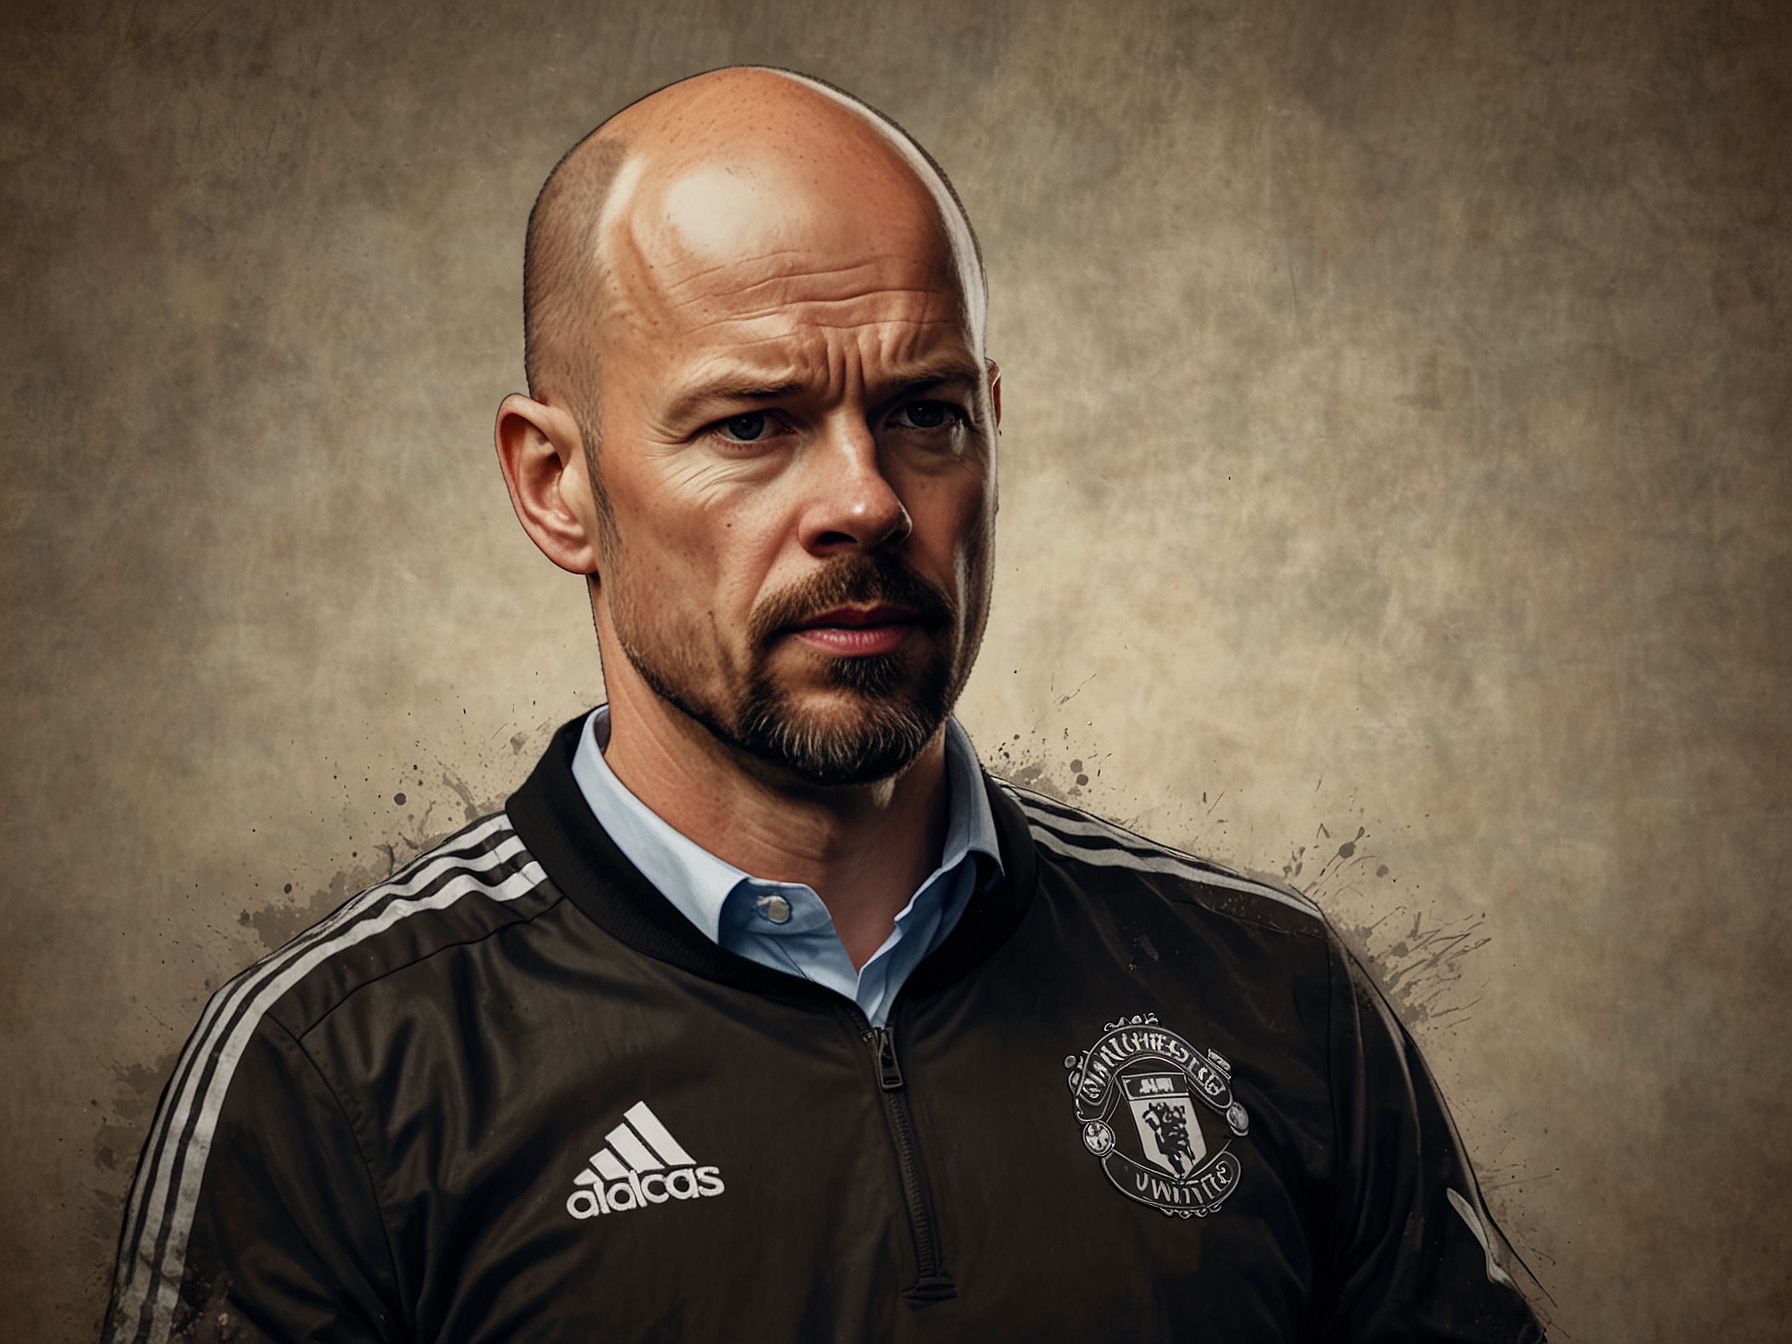 An image of Manchester United's manager Erik ten Hag, involved in intense discussions, symbolizing the club's strategic efforts to sign Matthijs de Ligt to enhance their defensive strength.